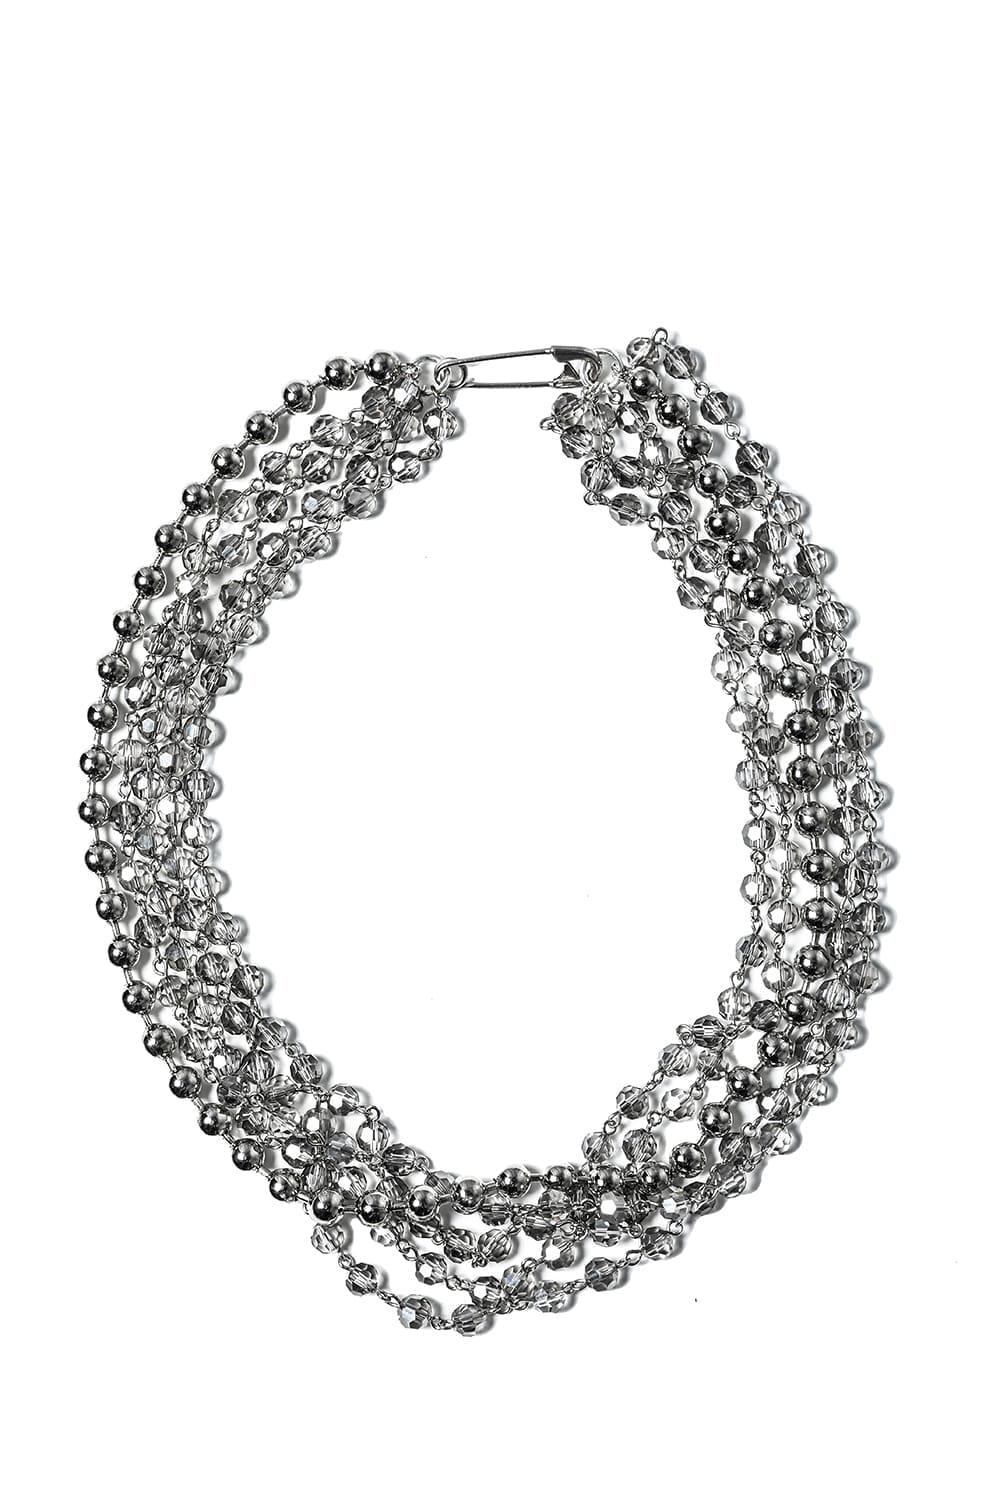 sa.0024AW22 | Quadruple glass beads with ball chain necklace